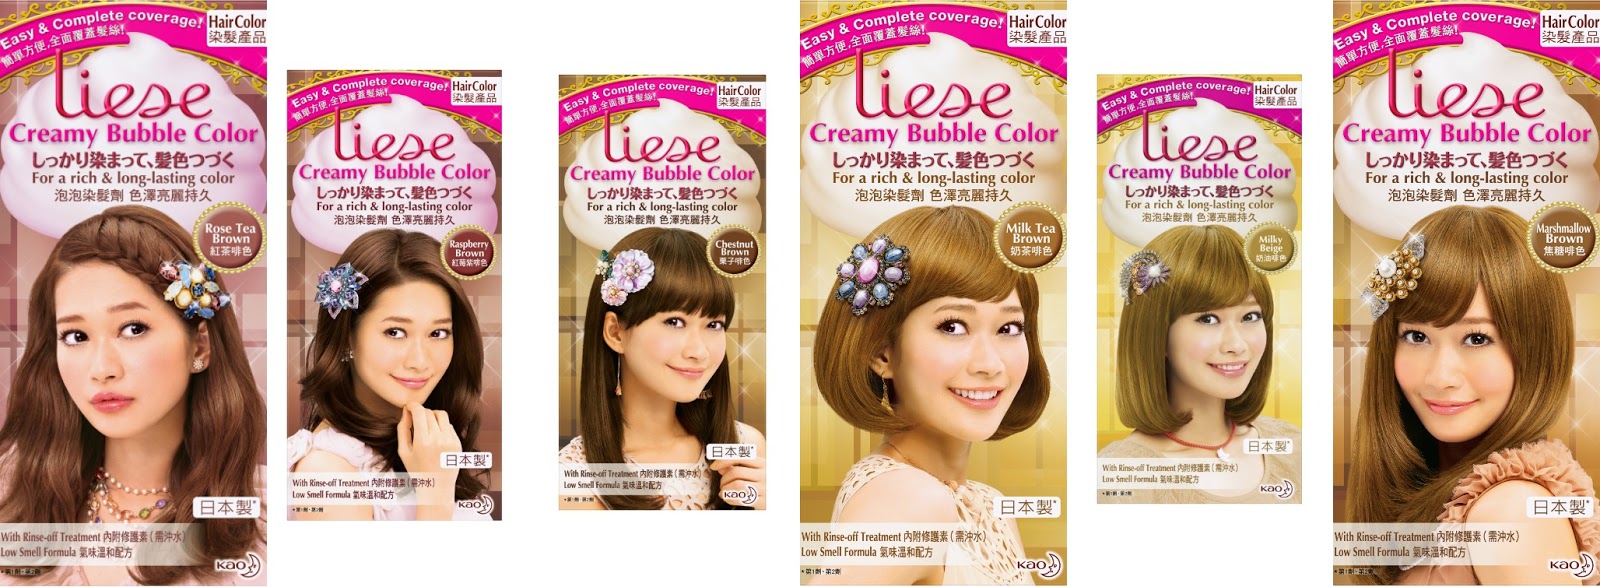 LIESE Creamy Bubble Hair Color now at Watsons! - ARTSY ...